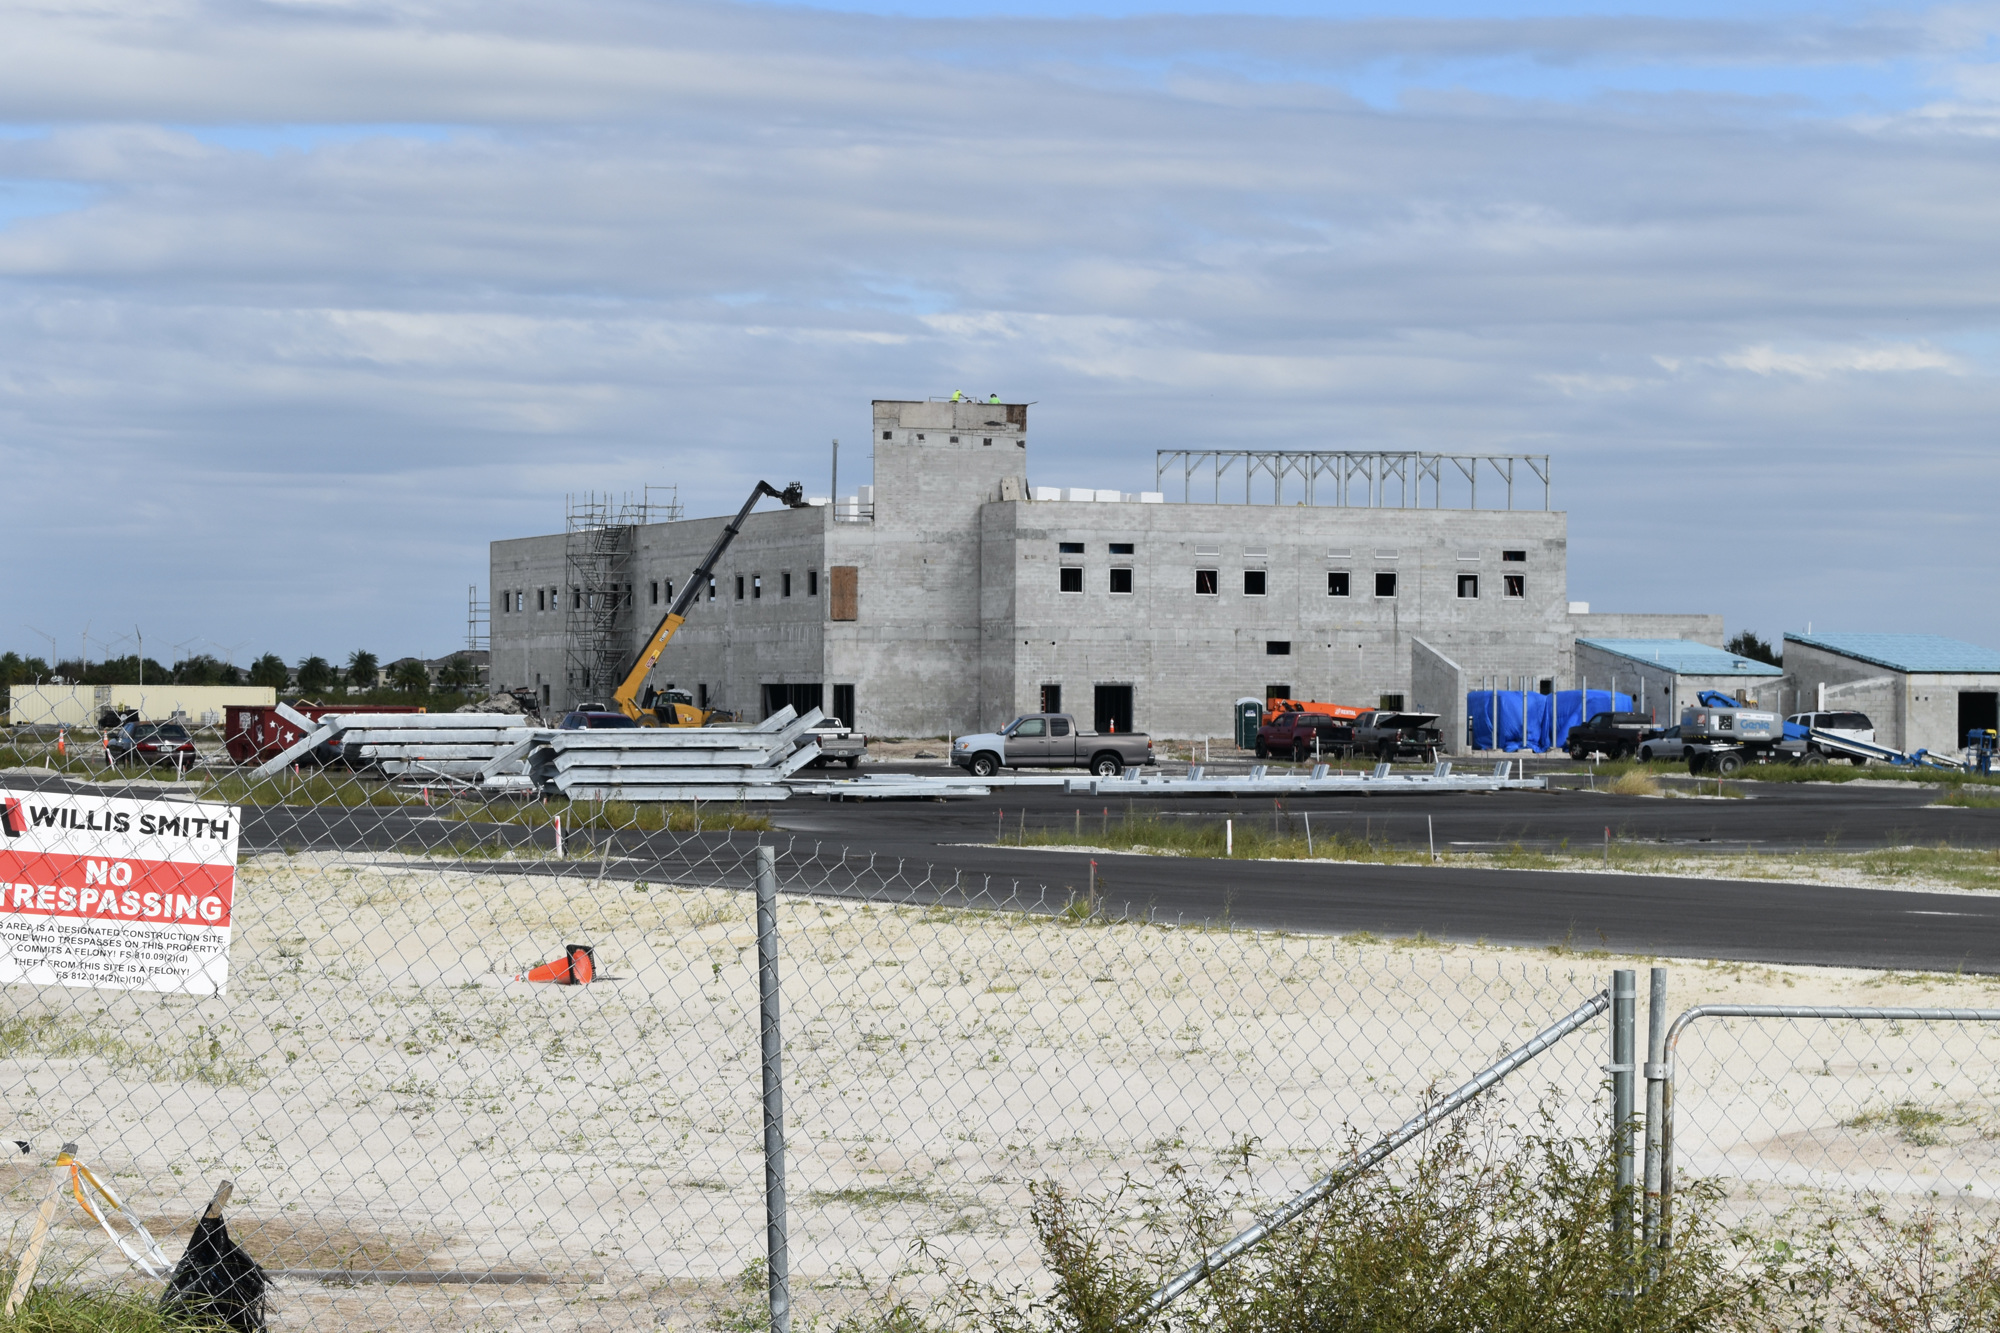 The Lakewood Ranch Library, which is being built by Willis Smith Construction, is expected to open late in 2023. (Photo by Ian Swaby)